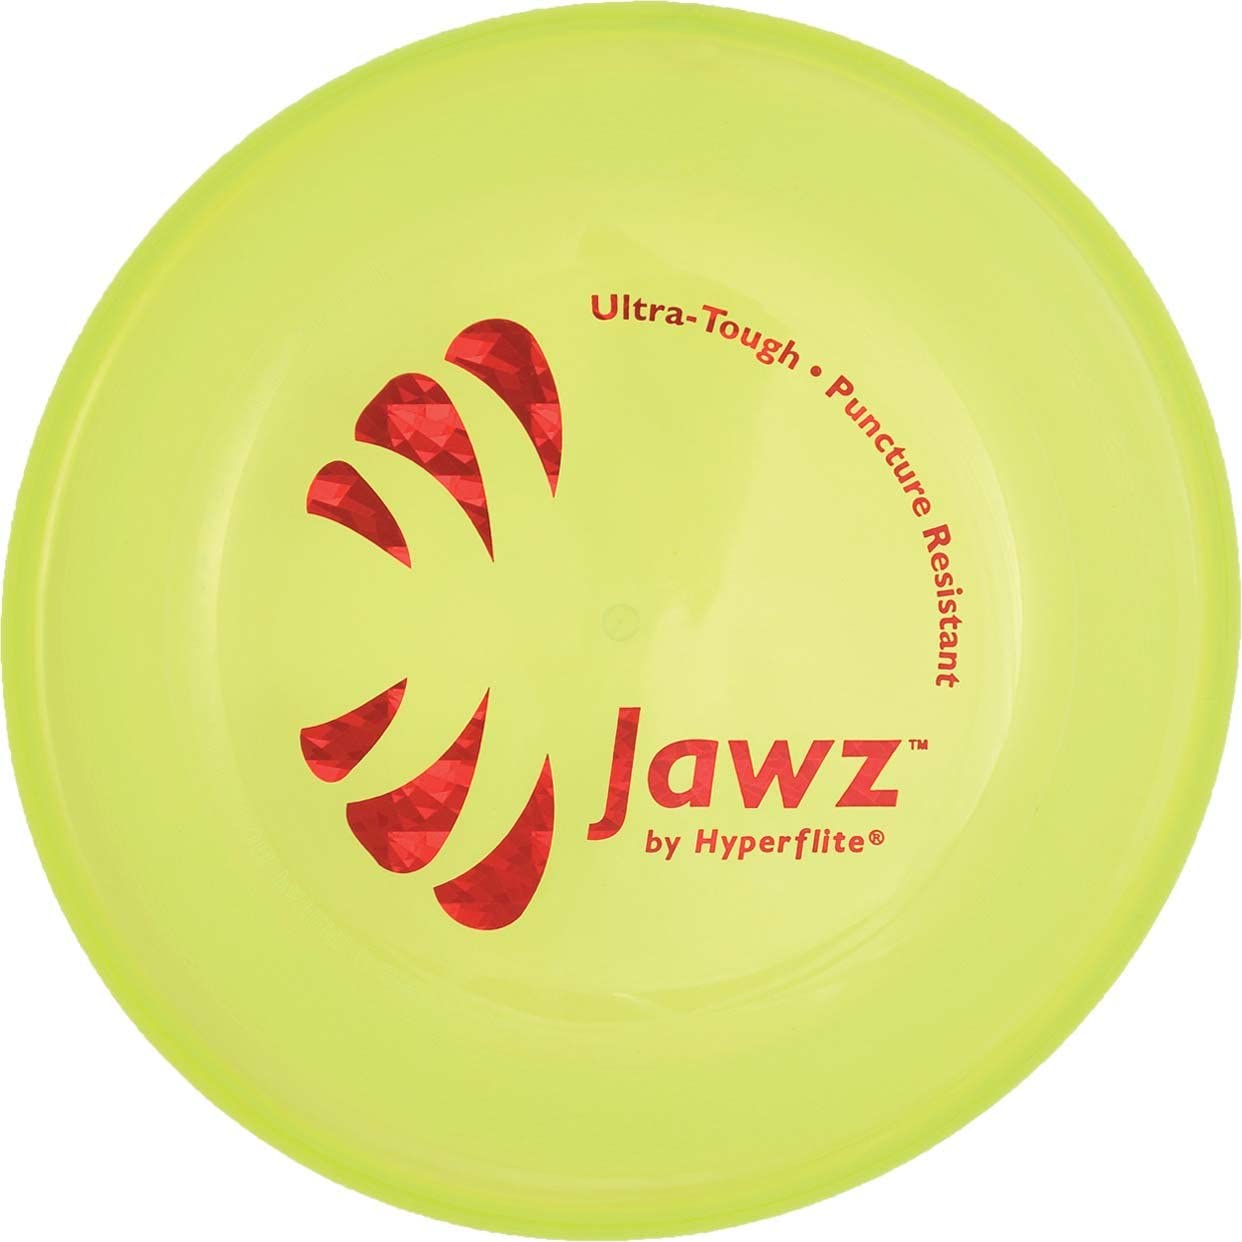 Hyperflite Jawz Lemon Lime Competition Dog Disc 8.75 Inch, Worlds Toughest, Best Flying, Puncture Resistant, Dog Frisbee, Not a Toy Competition Grade, Outdoor Flying Disc Training